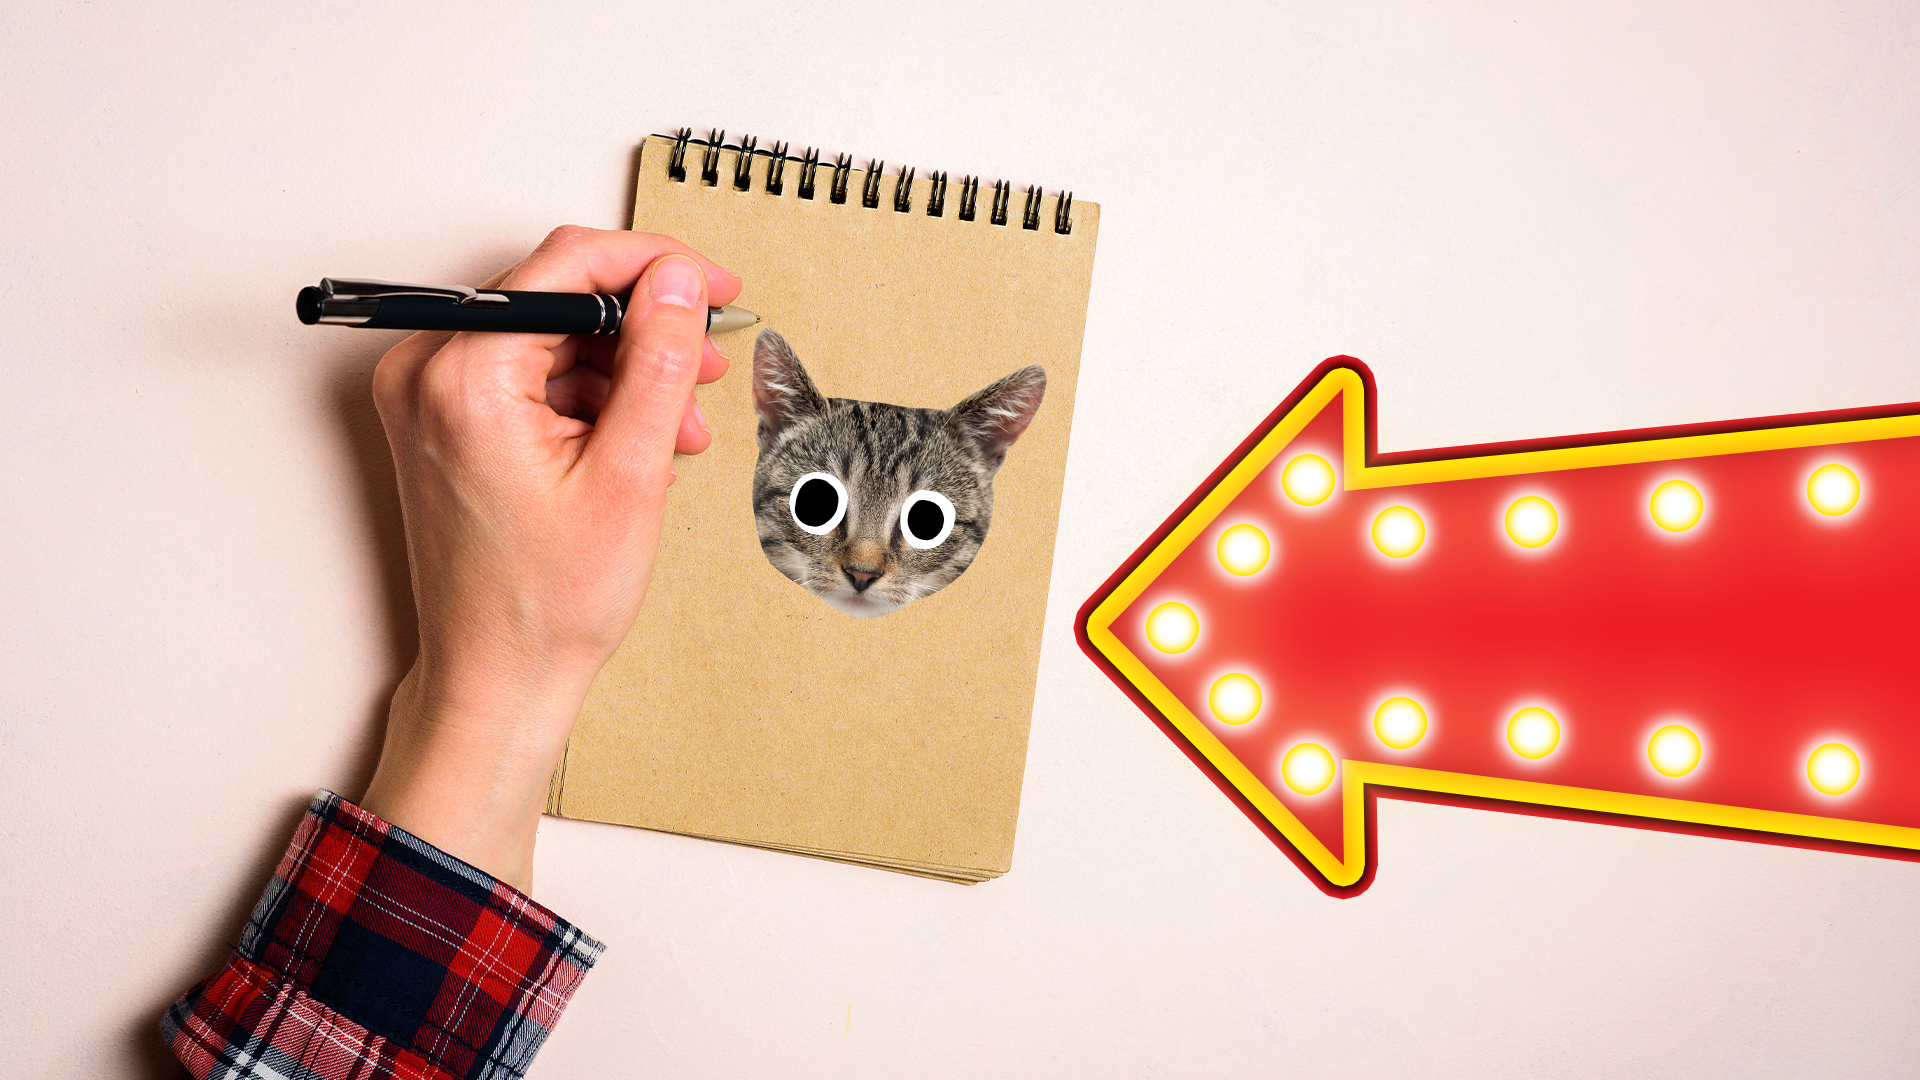 Lef hander writing on notepad with cat face and light up arrow